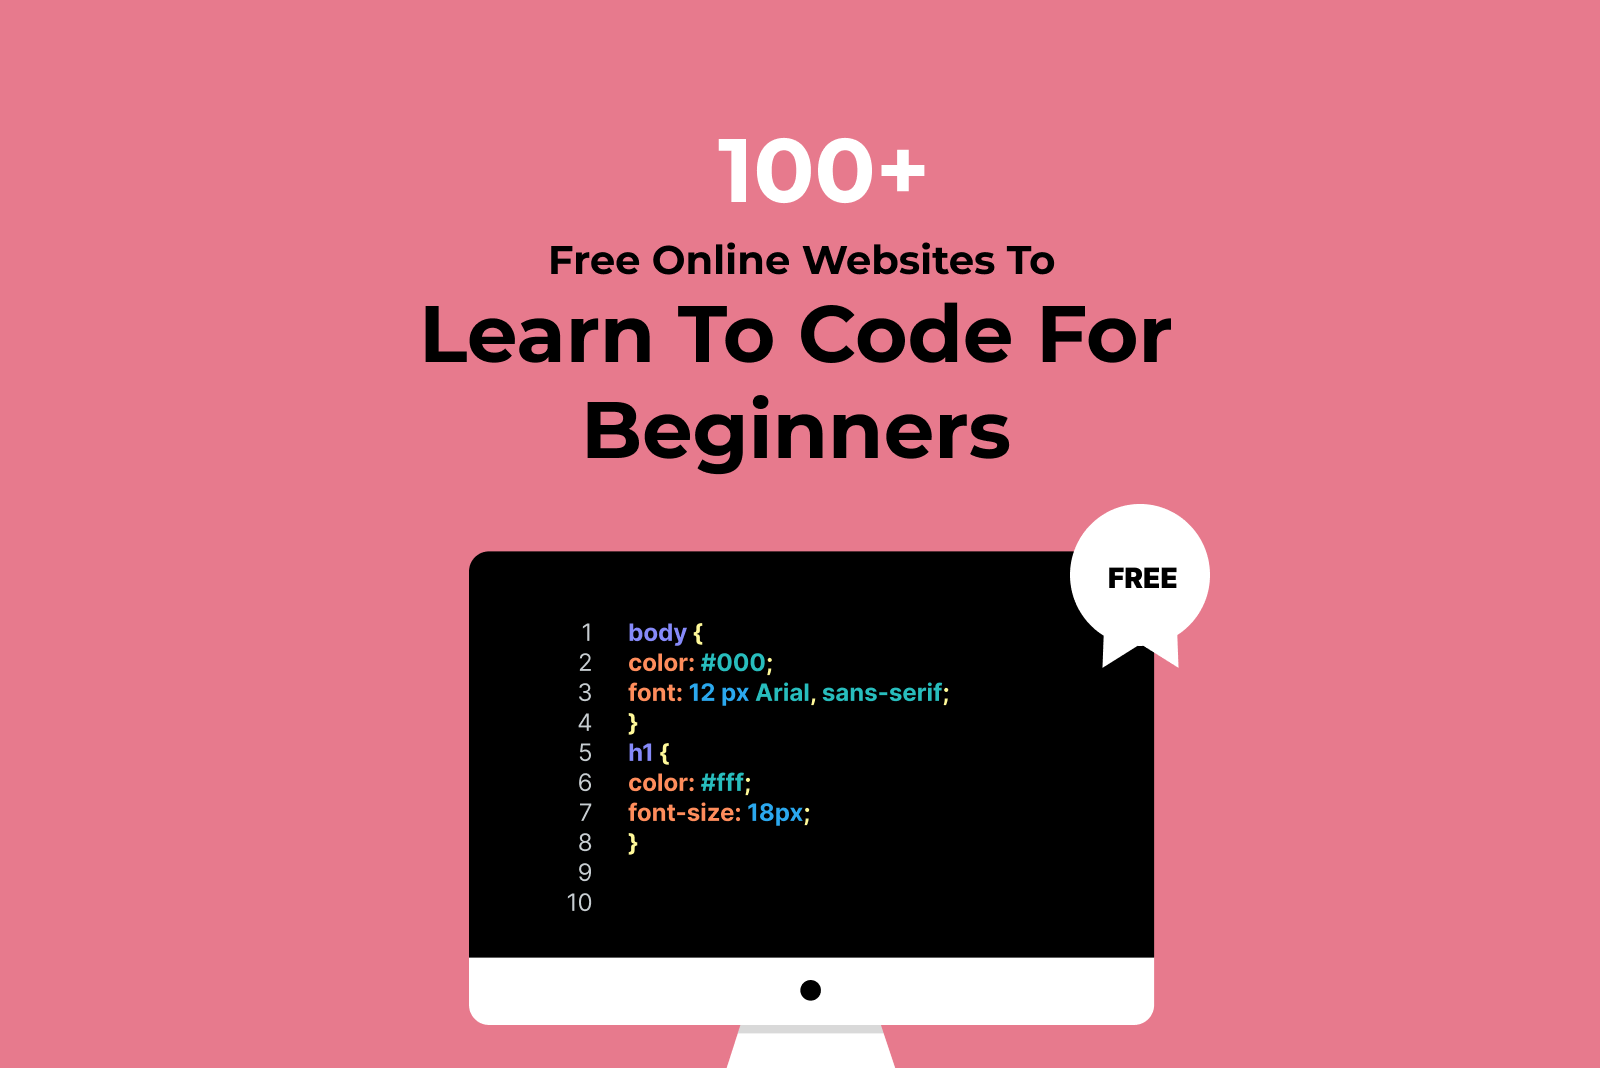 100 Free Online Websites to Learn to Code For Beginners